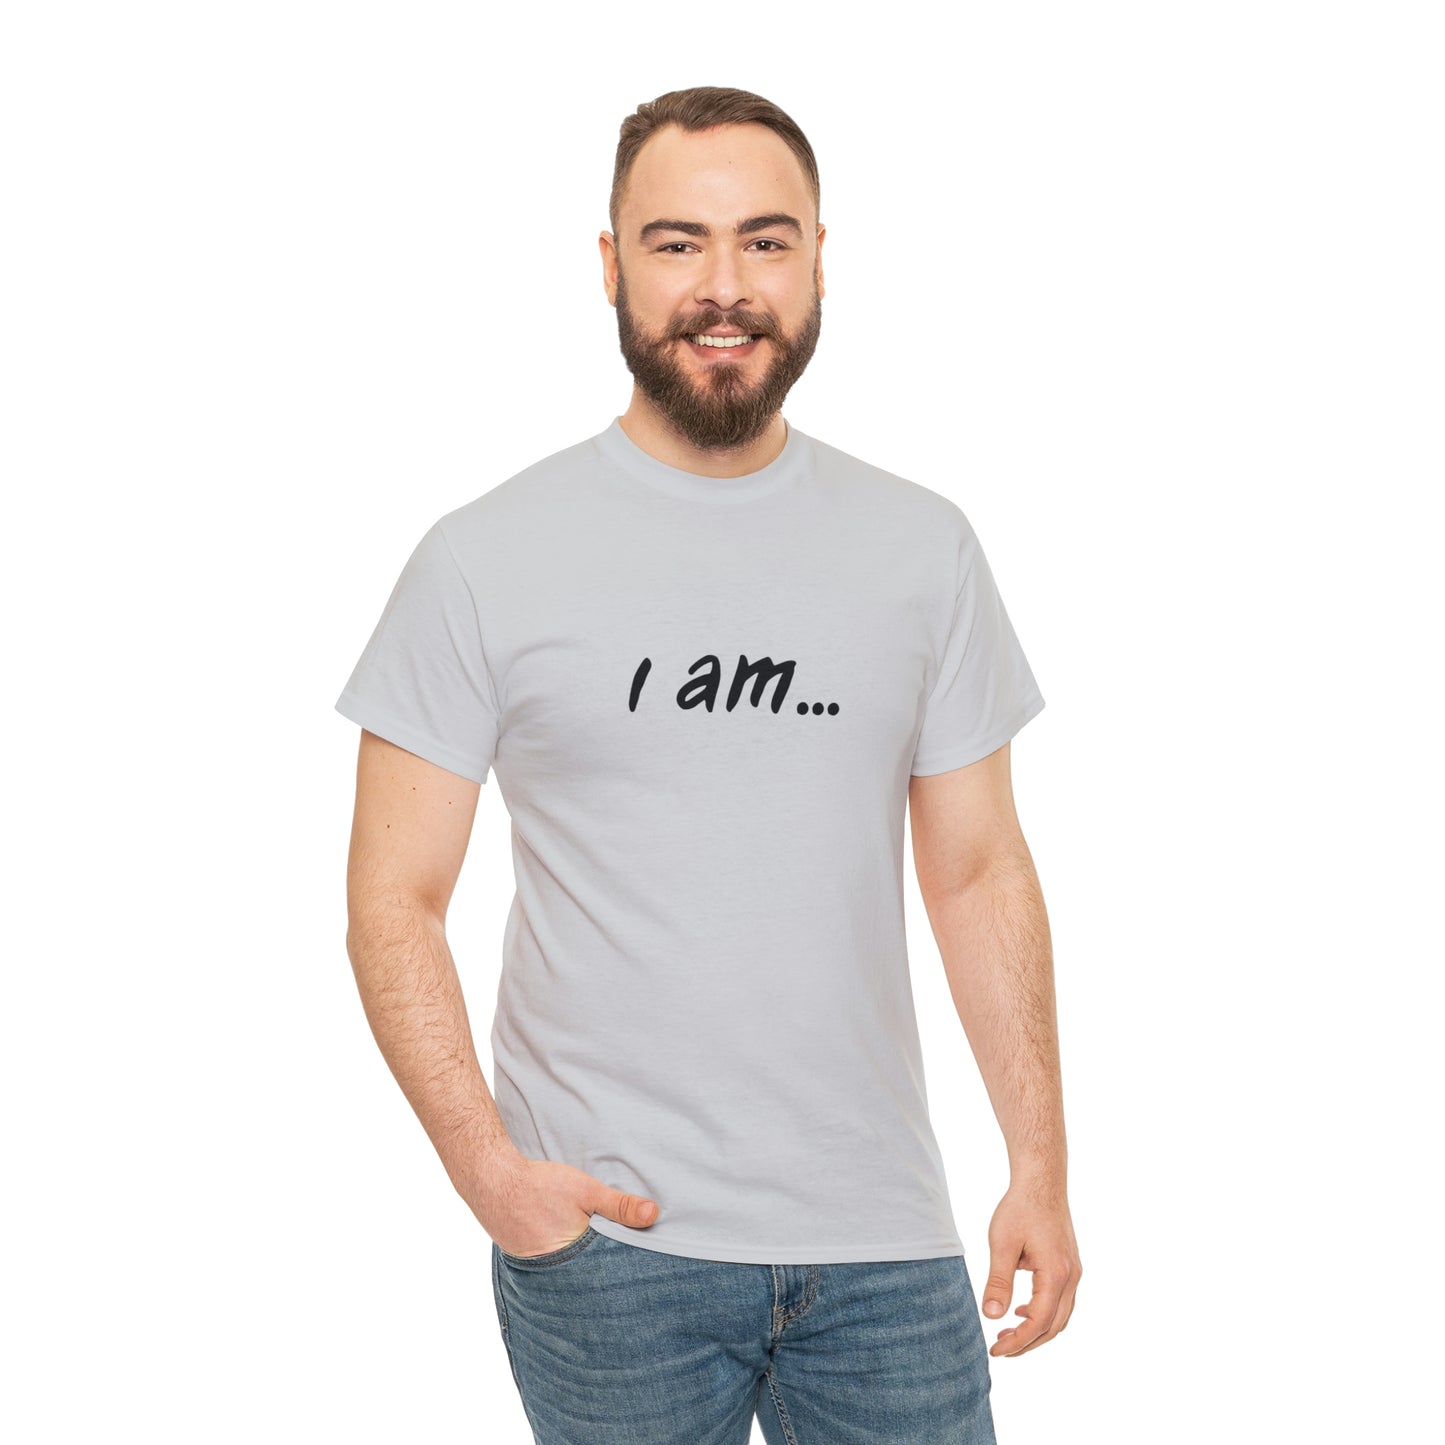 'I am...fisher people'. - Unisex Heavy Cotton Tee